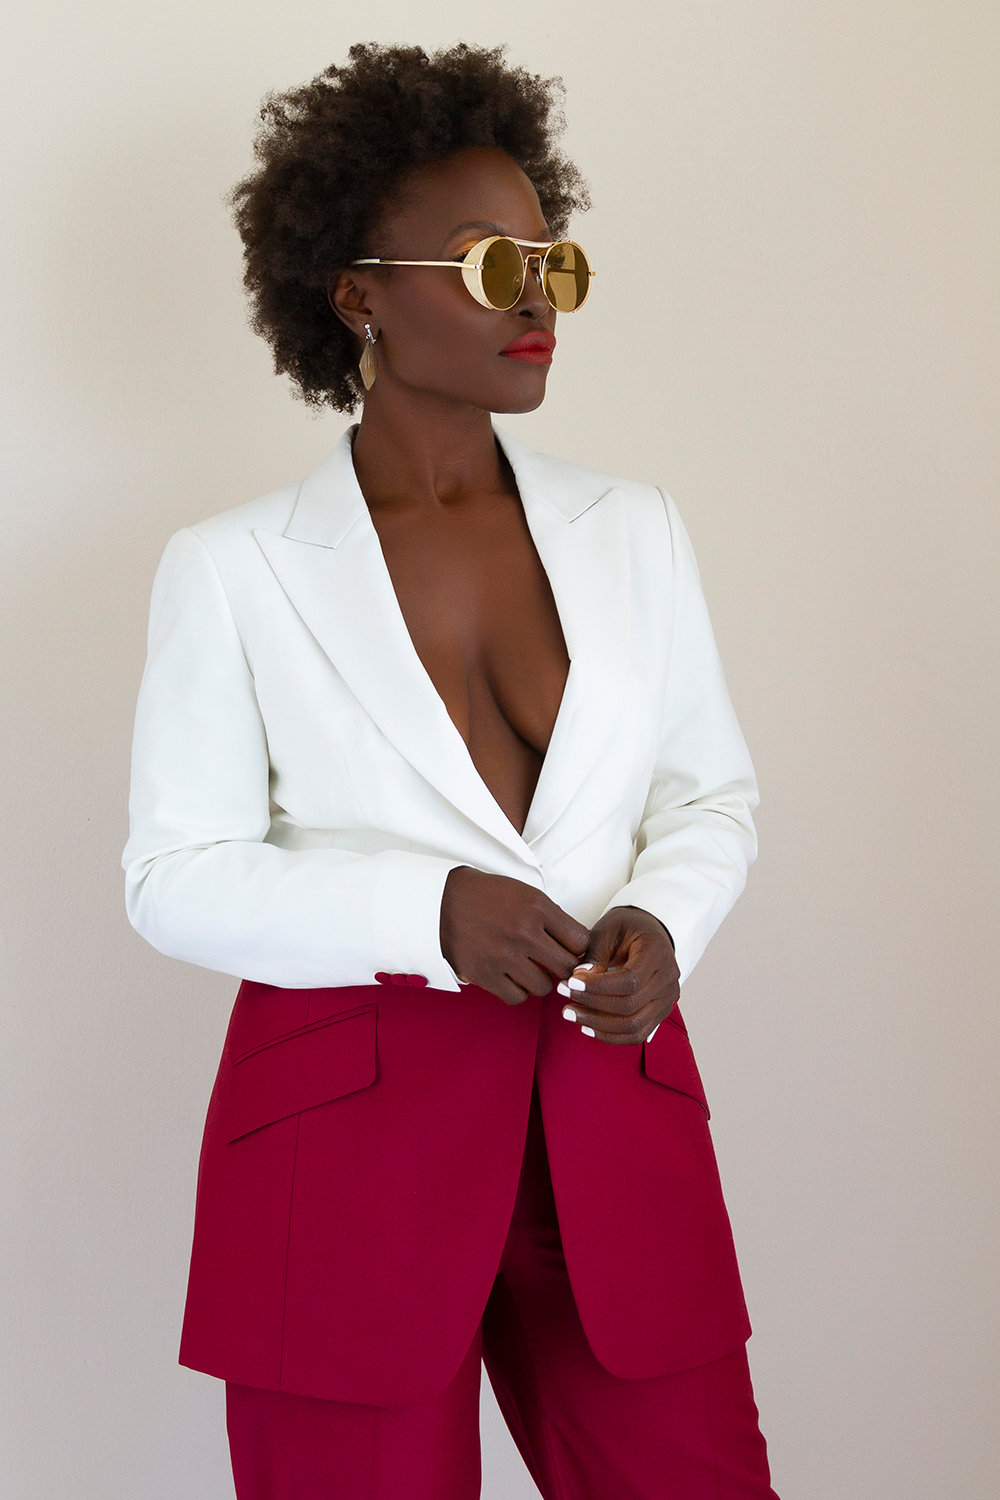 A woman wearing a white blazer and red pants.